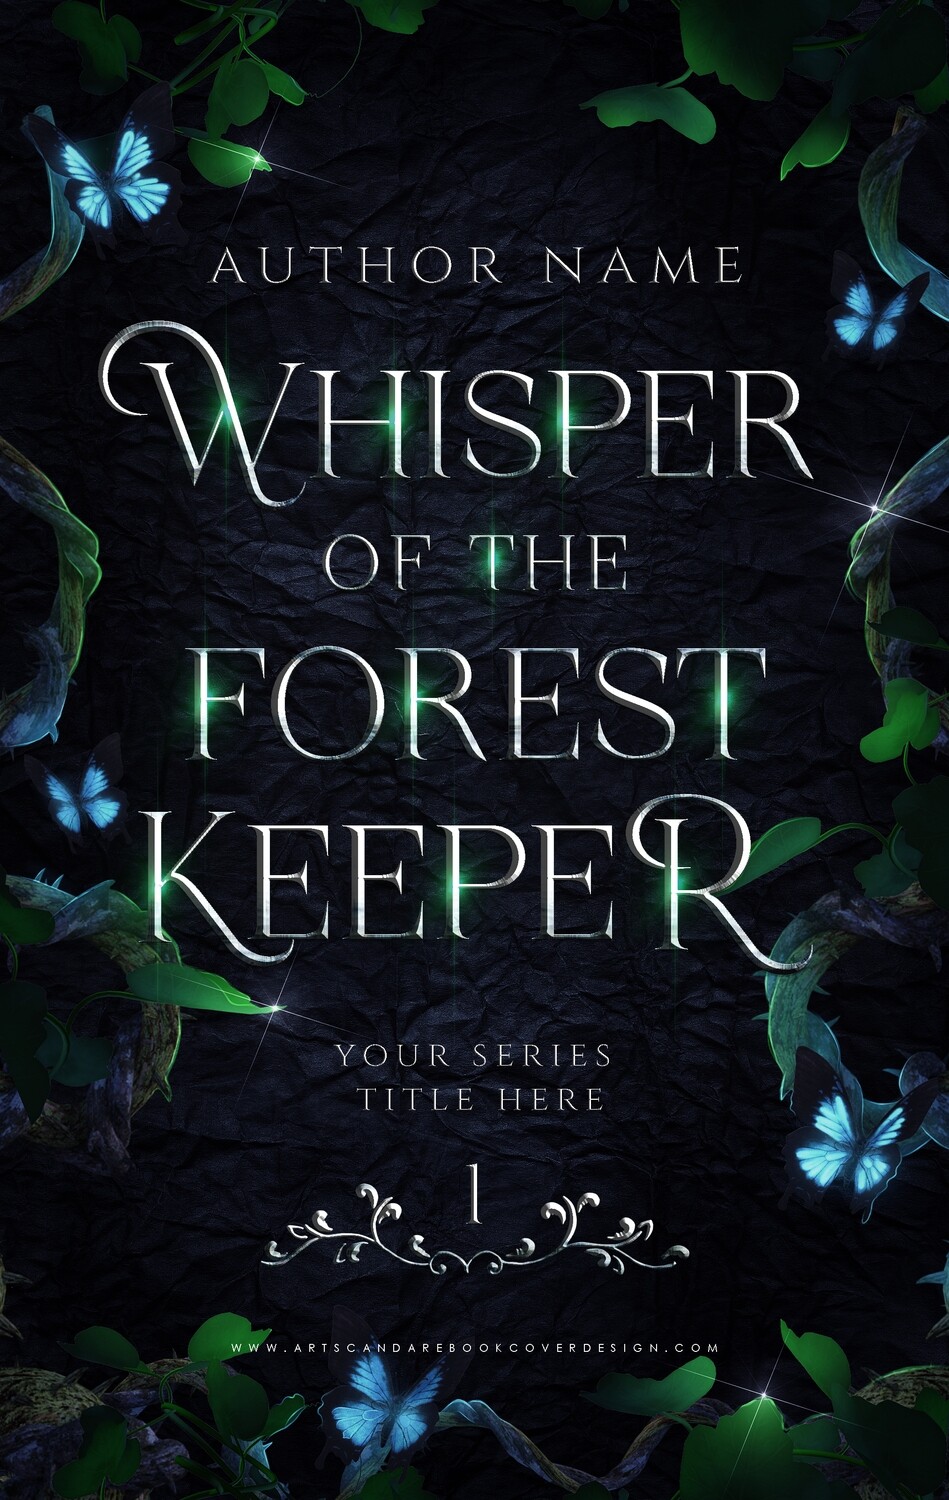 Ebook: Whisper of the Forest Keeper DUOLOGY